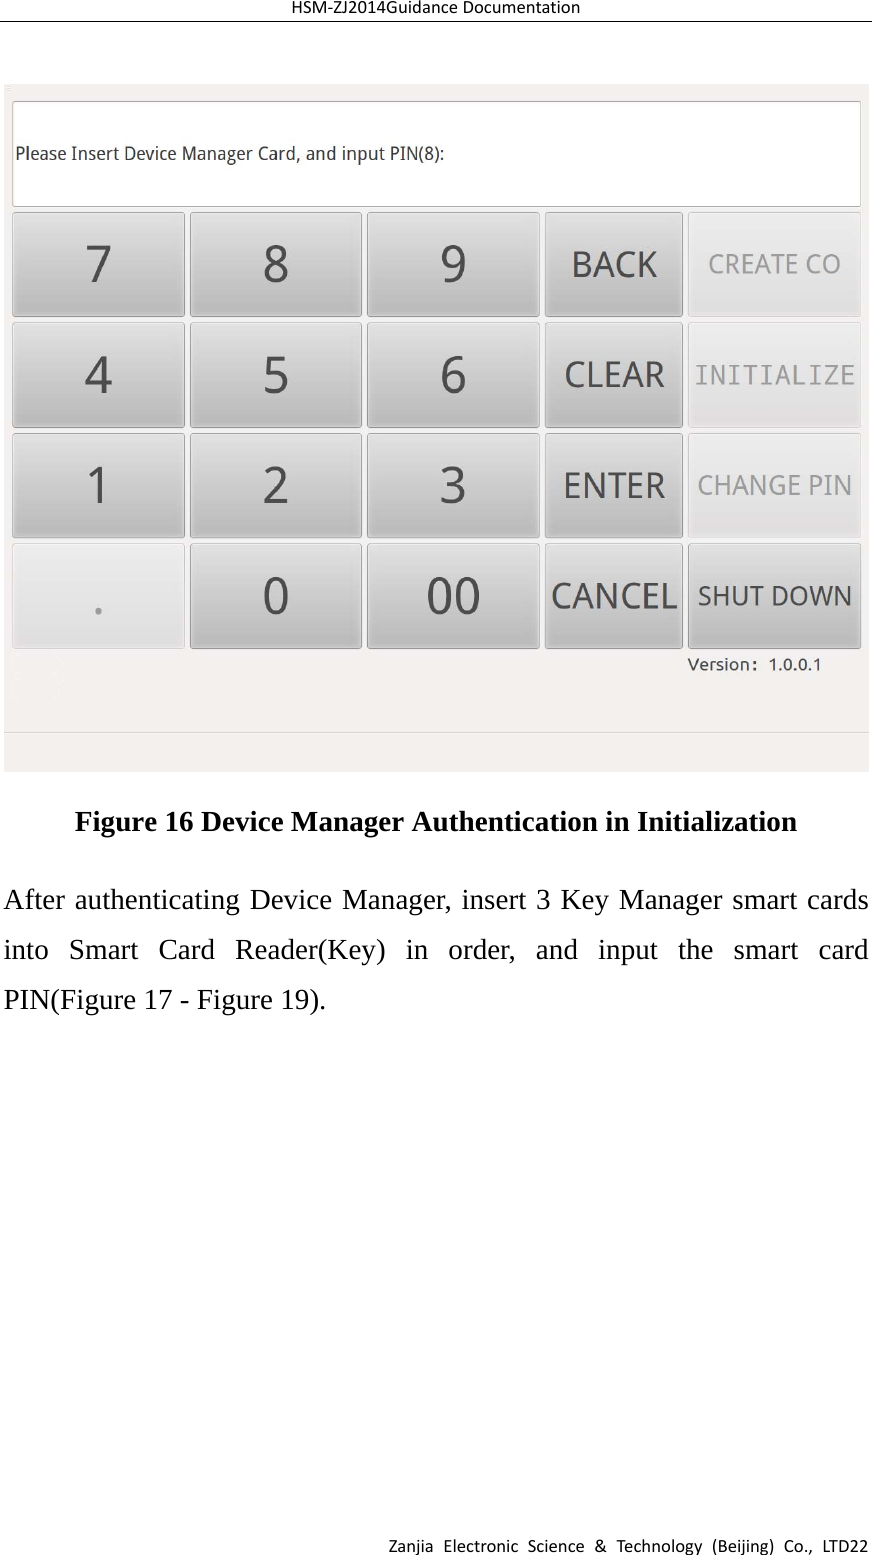 HSM‐ZJ2014GuidanceDocumentationZanjiaElectronicScience&amp;Technology(Beijing)Co.,LTD22 Figure 16 Device Manager Authentication in Initialization After authenticating Device Manager, insert 3 Key Manager smart cards into Smart Card Reader(Key) in order, and input the smart card PIN(Figure 17 - Figure 19).   